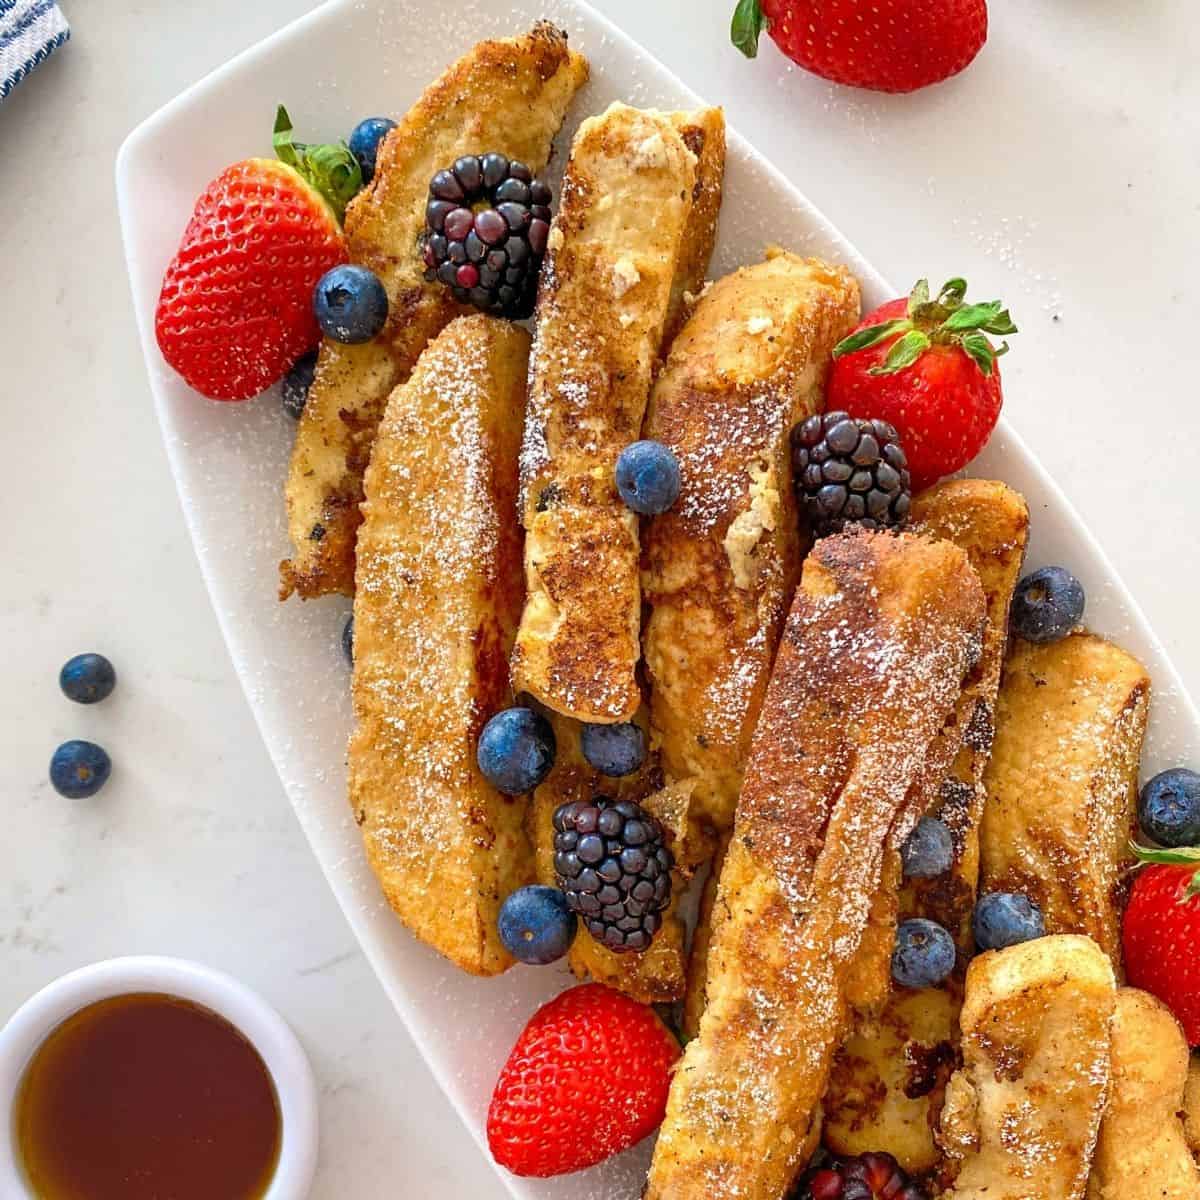 French toast sticks in white platter with strawberries, blueberries and black berries on top.